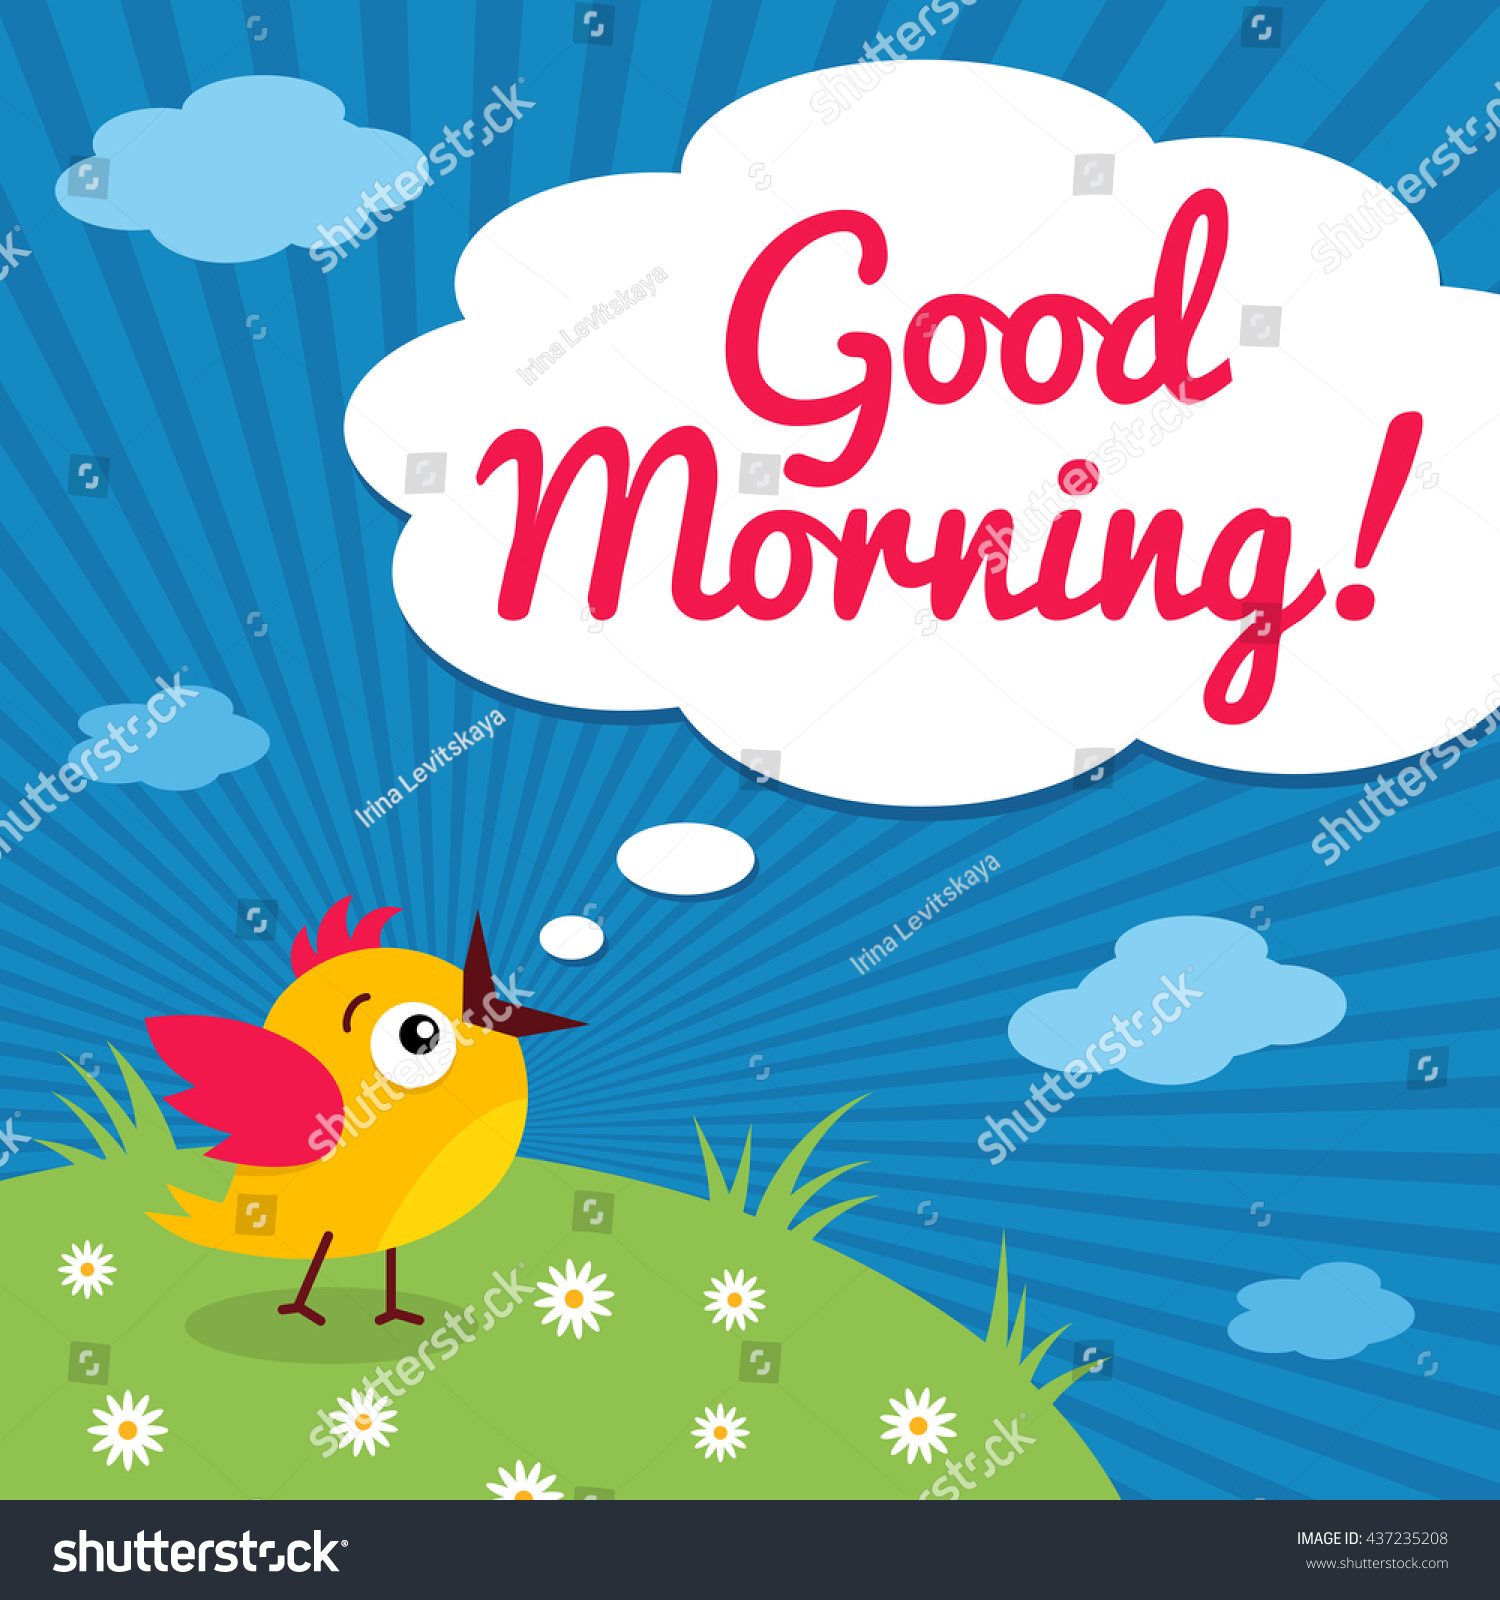 Good Morning Funny Little Bird Open Royalty Free Stock Image